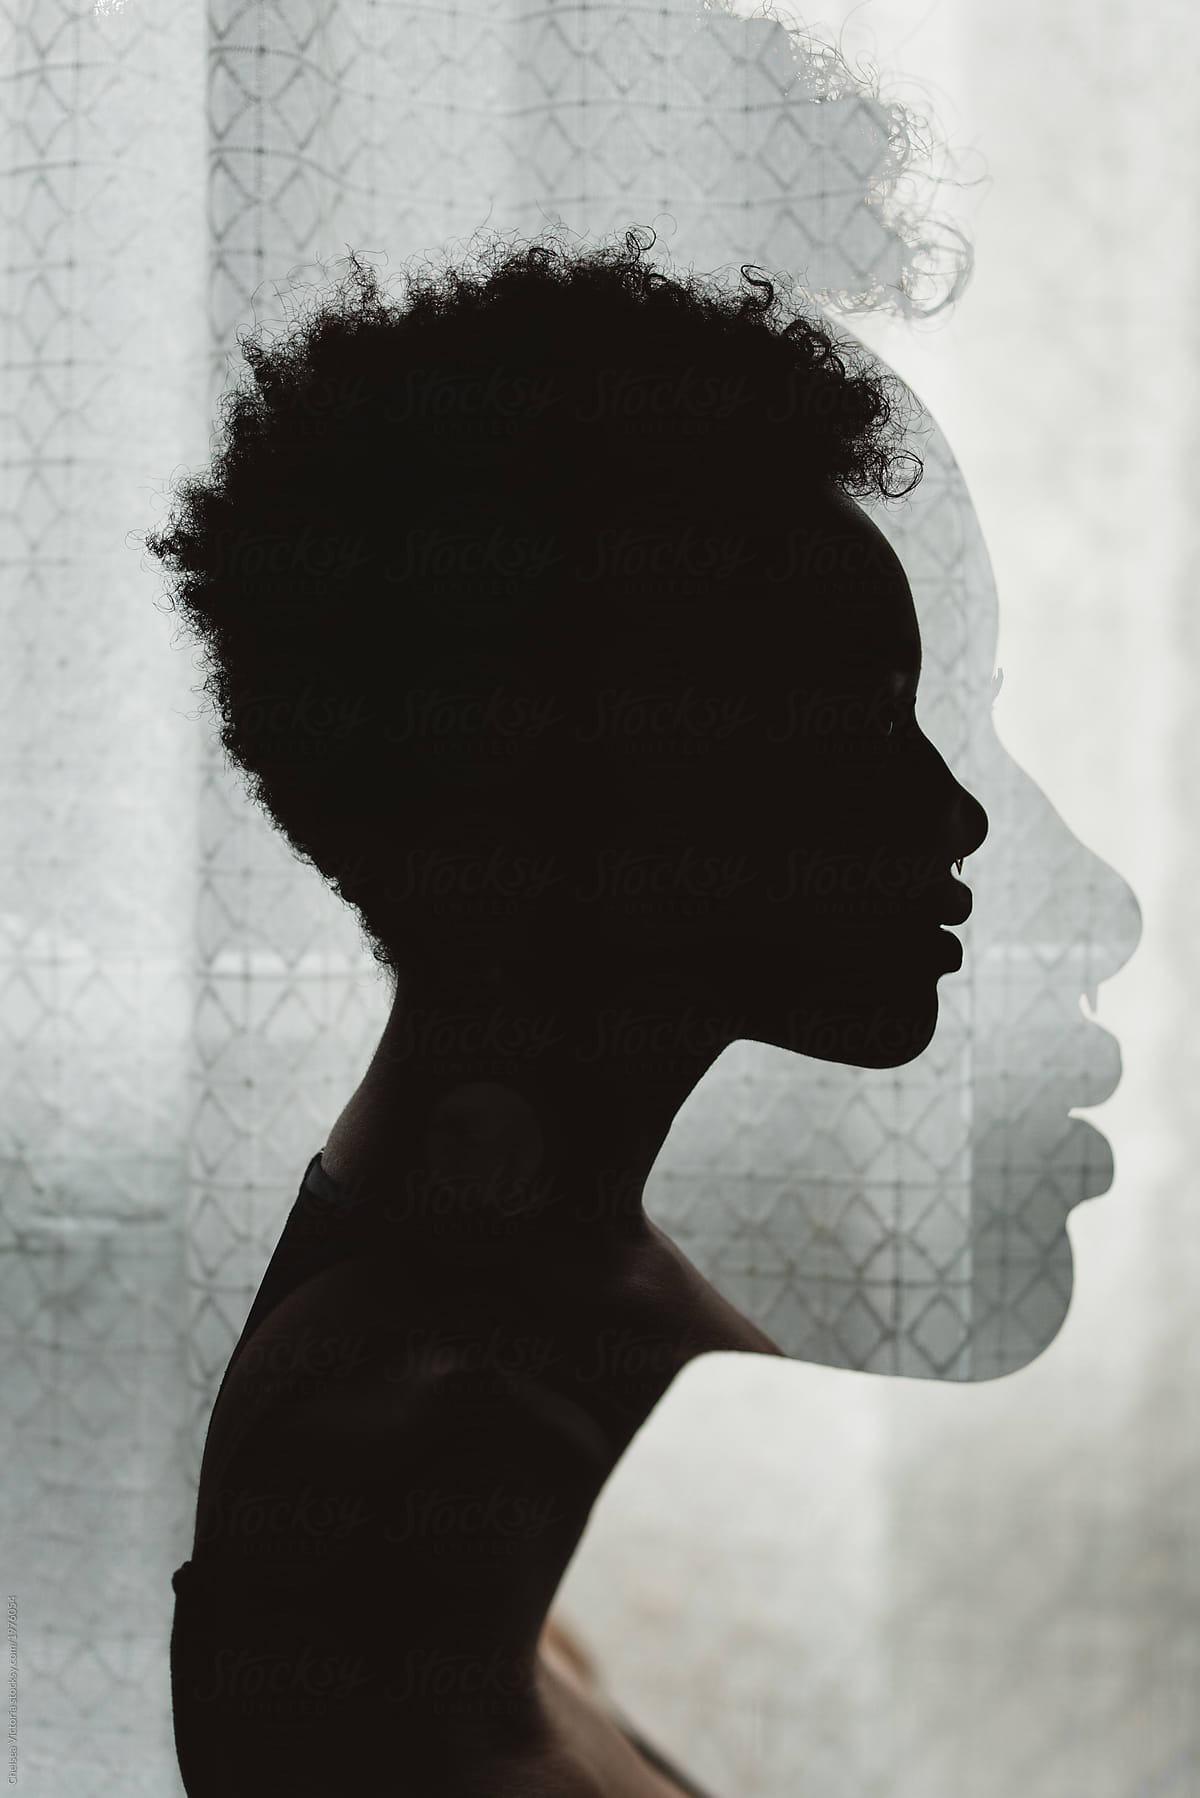 A young African American woman in silhouette